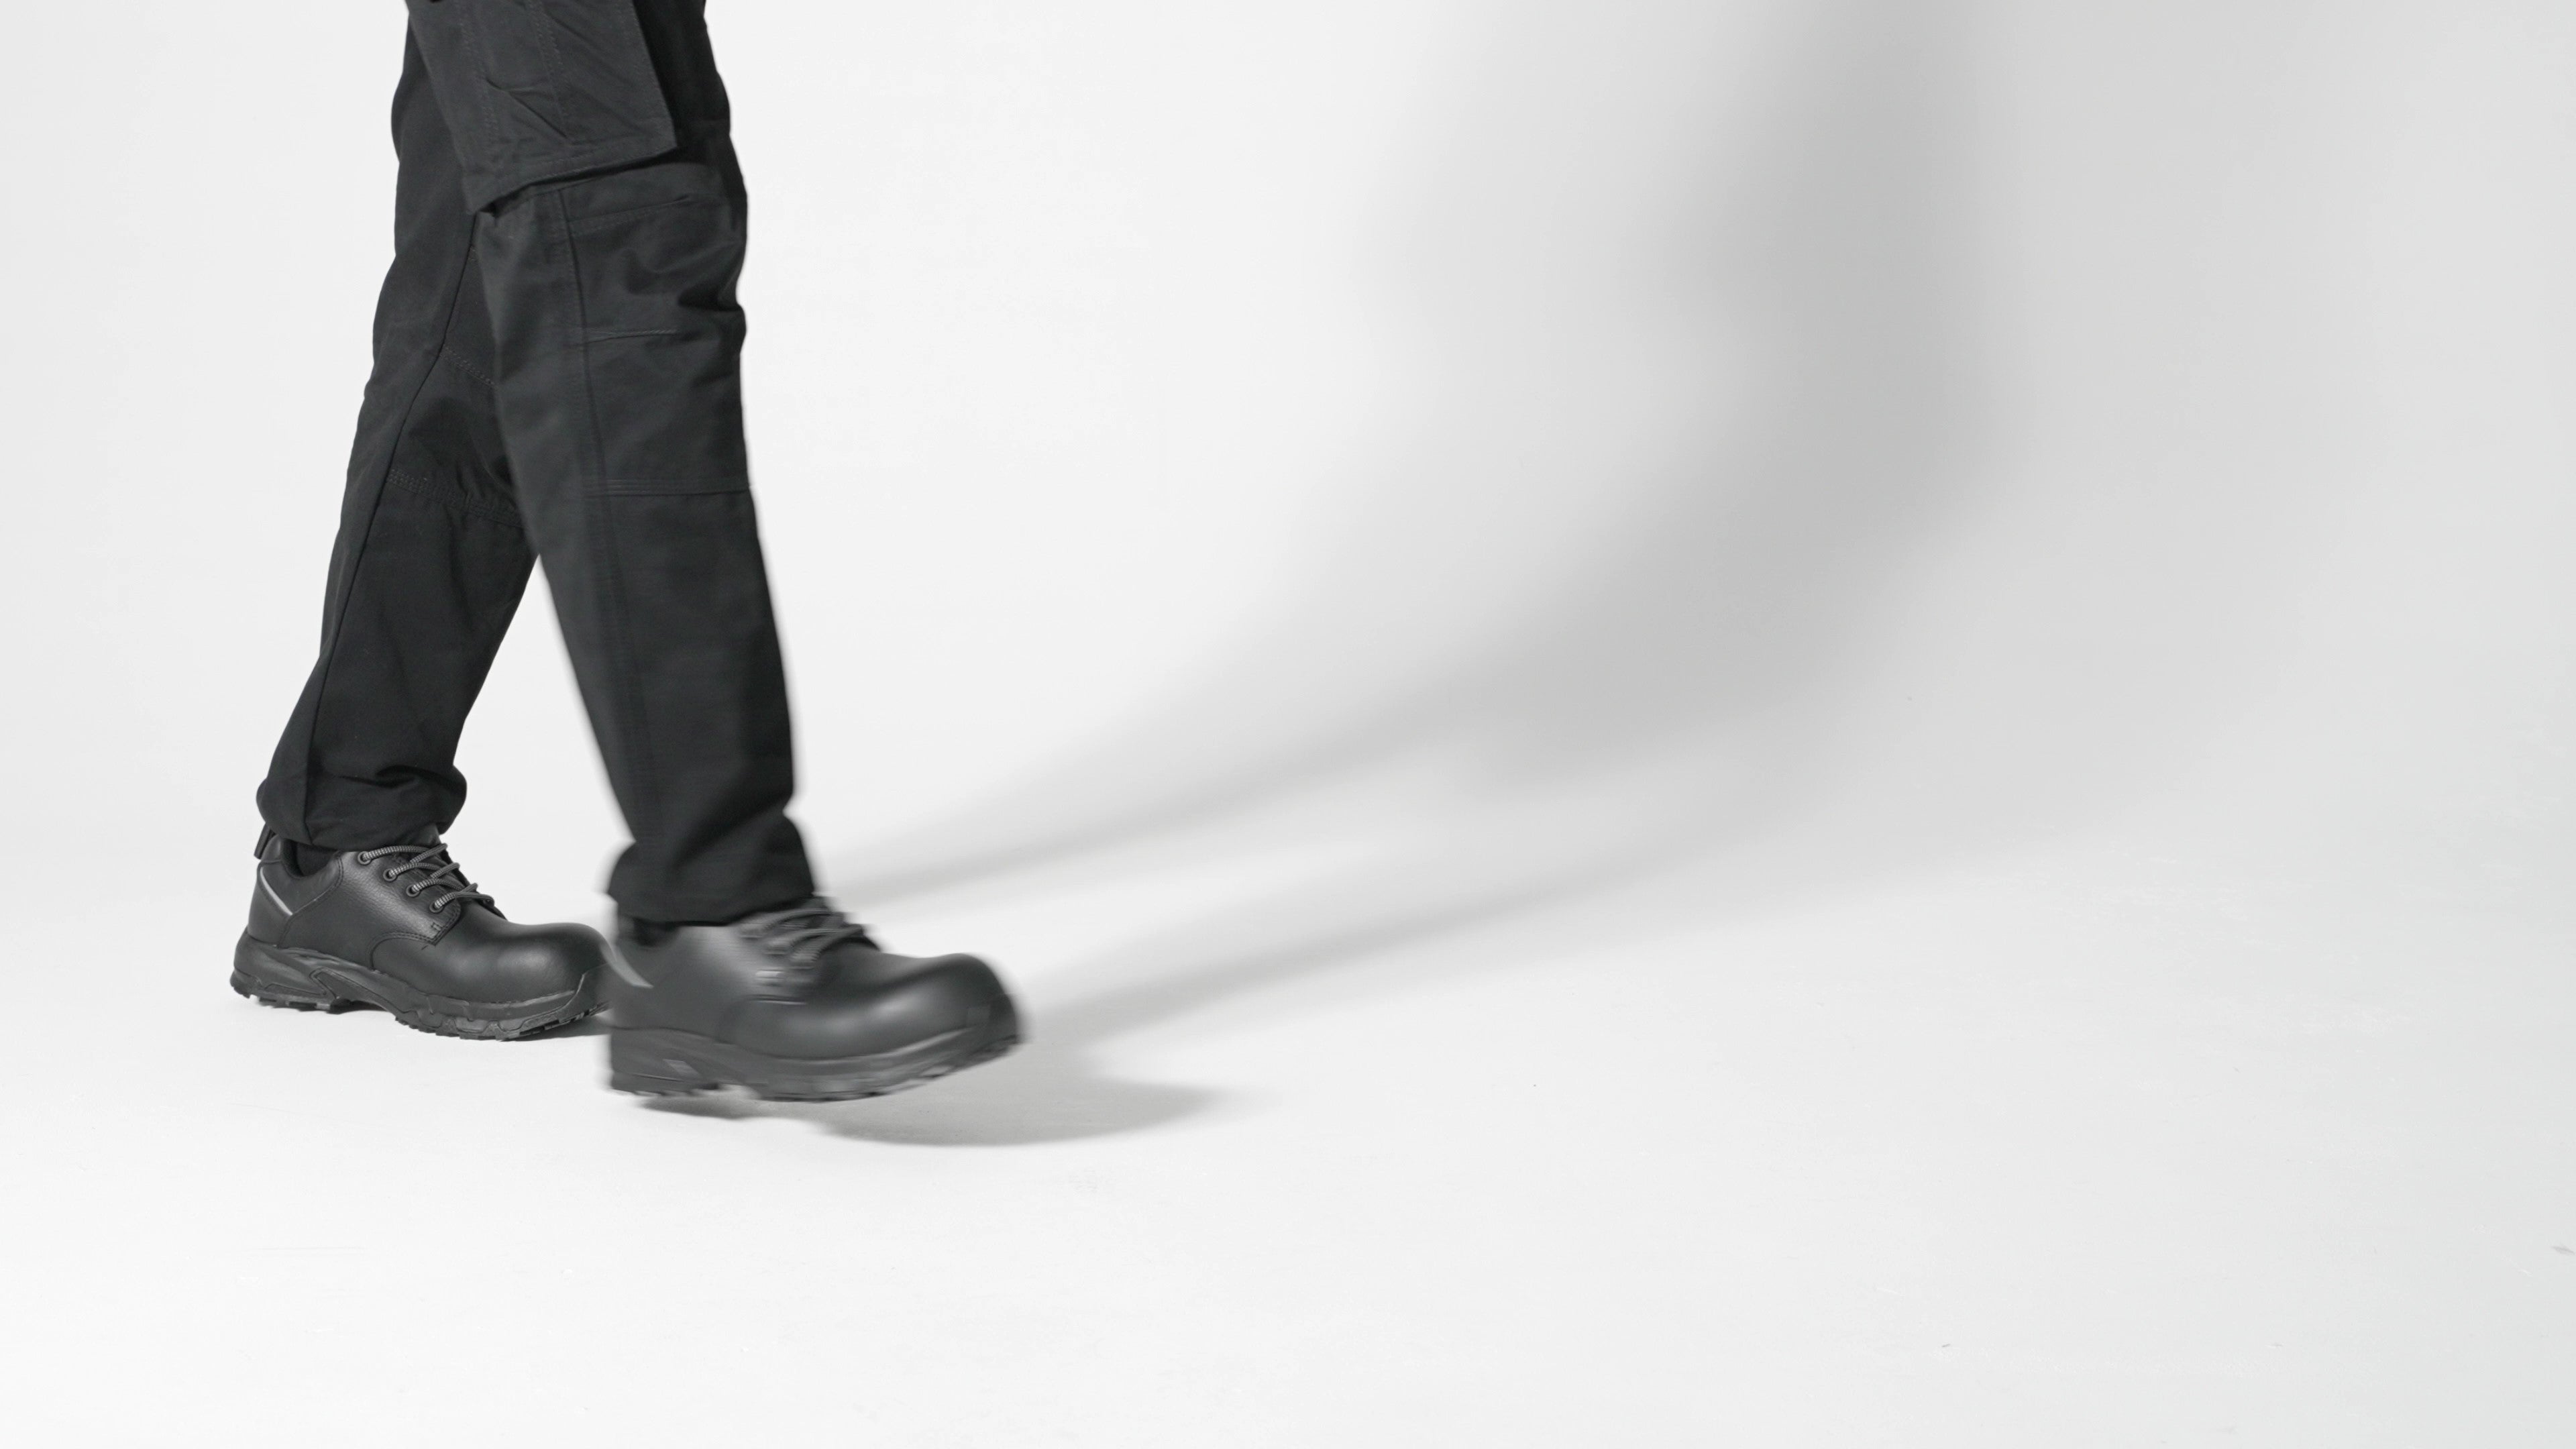 The Forkhill Black from Shoes For Crews is a slip-resistant safety shoe with a clog-resistant sole featuring our Tripguard technology, product video.